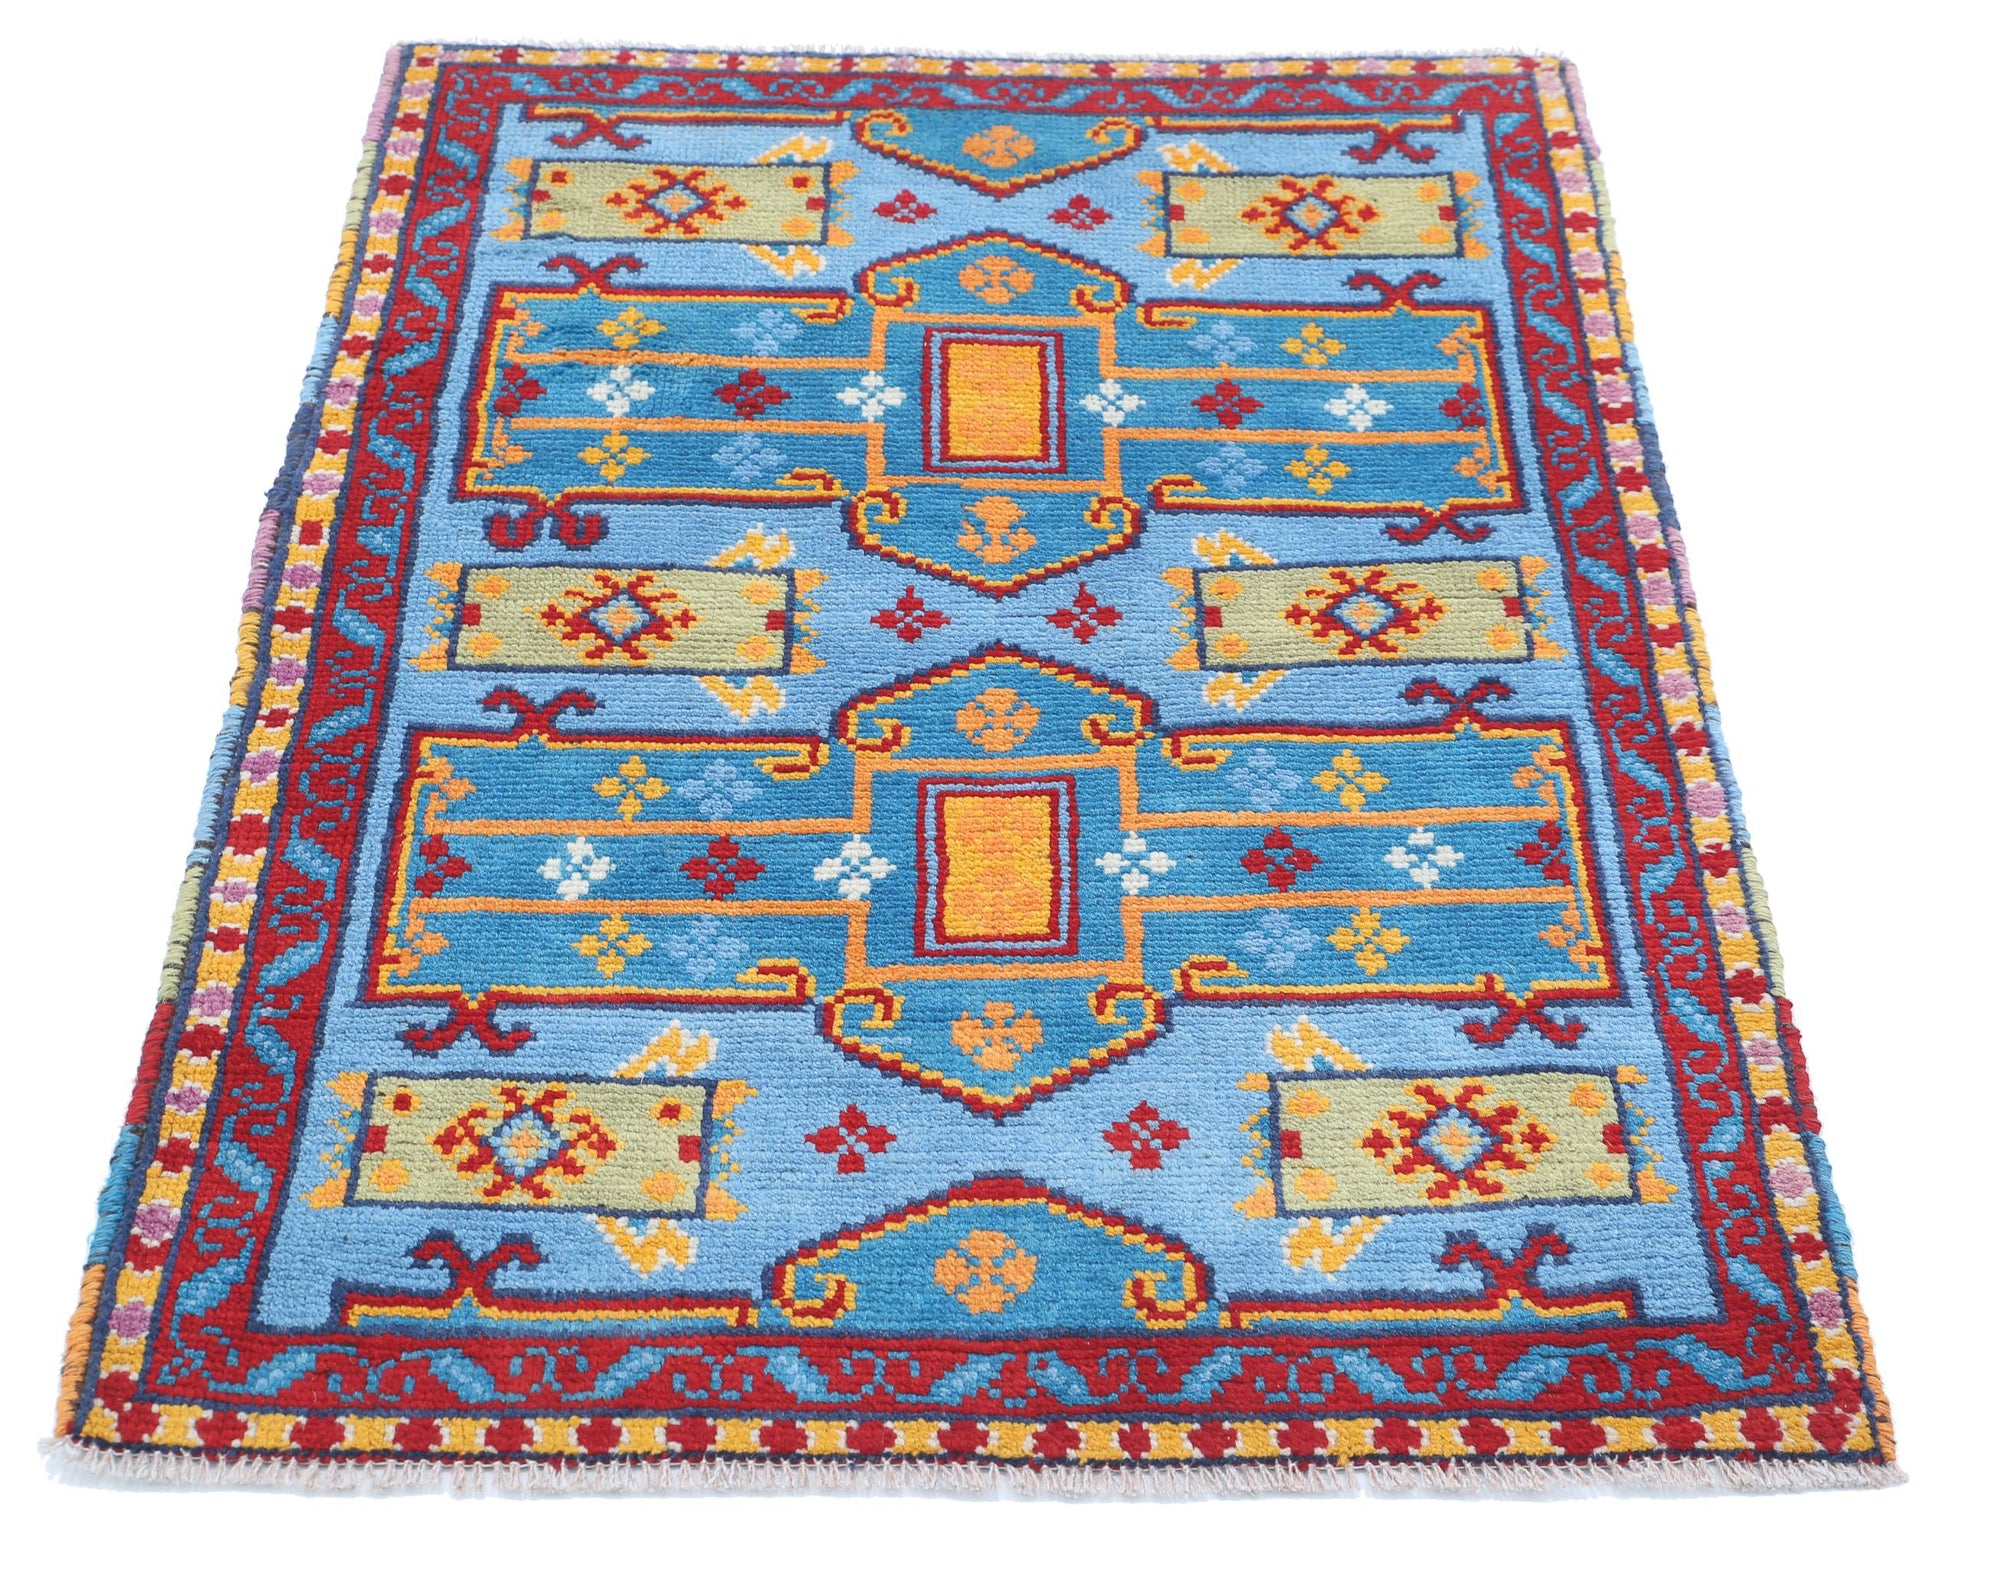 Revival-hand-knotted-qarghani-wool-rug-5014019-3.jpg